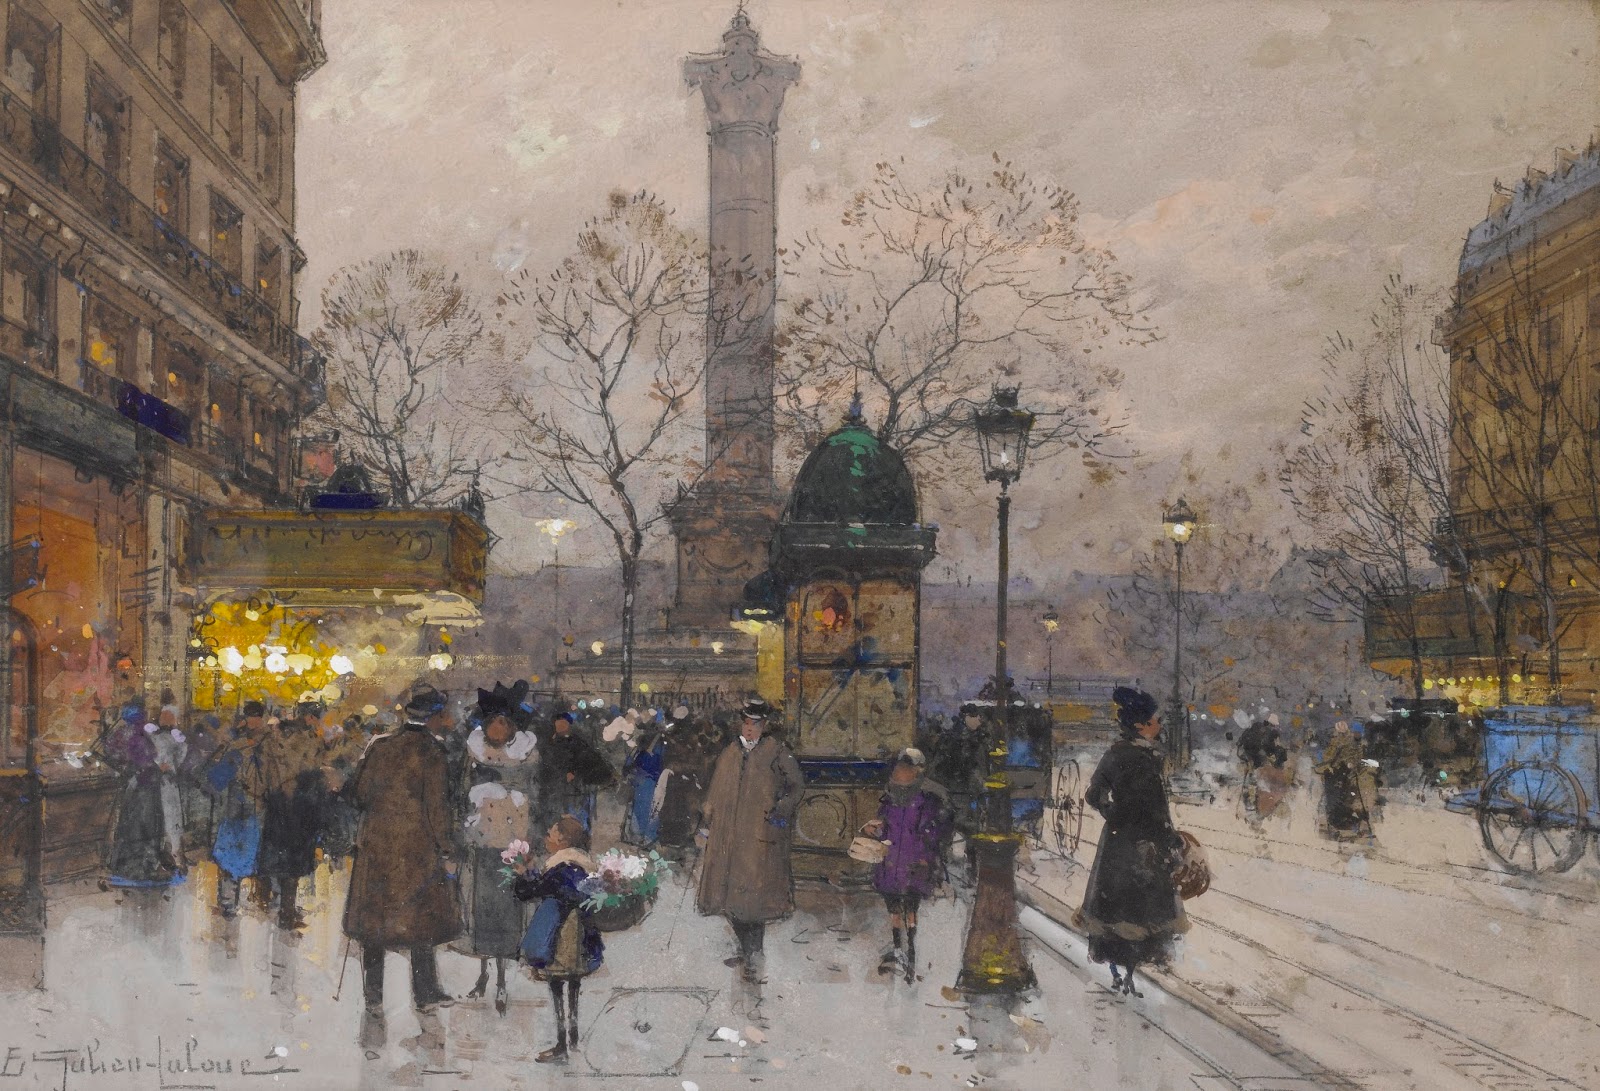 Eugene Laloue 1854 -1941 | Art and Influence